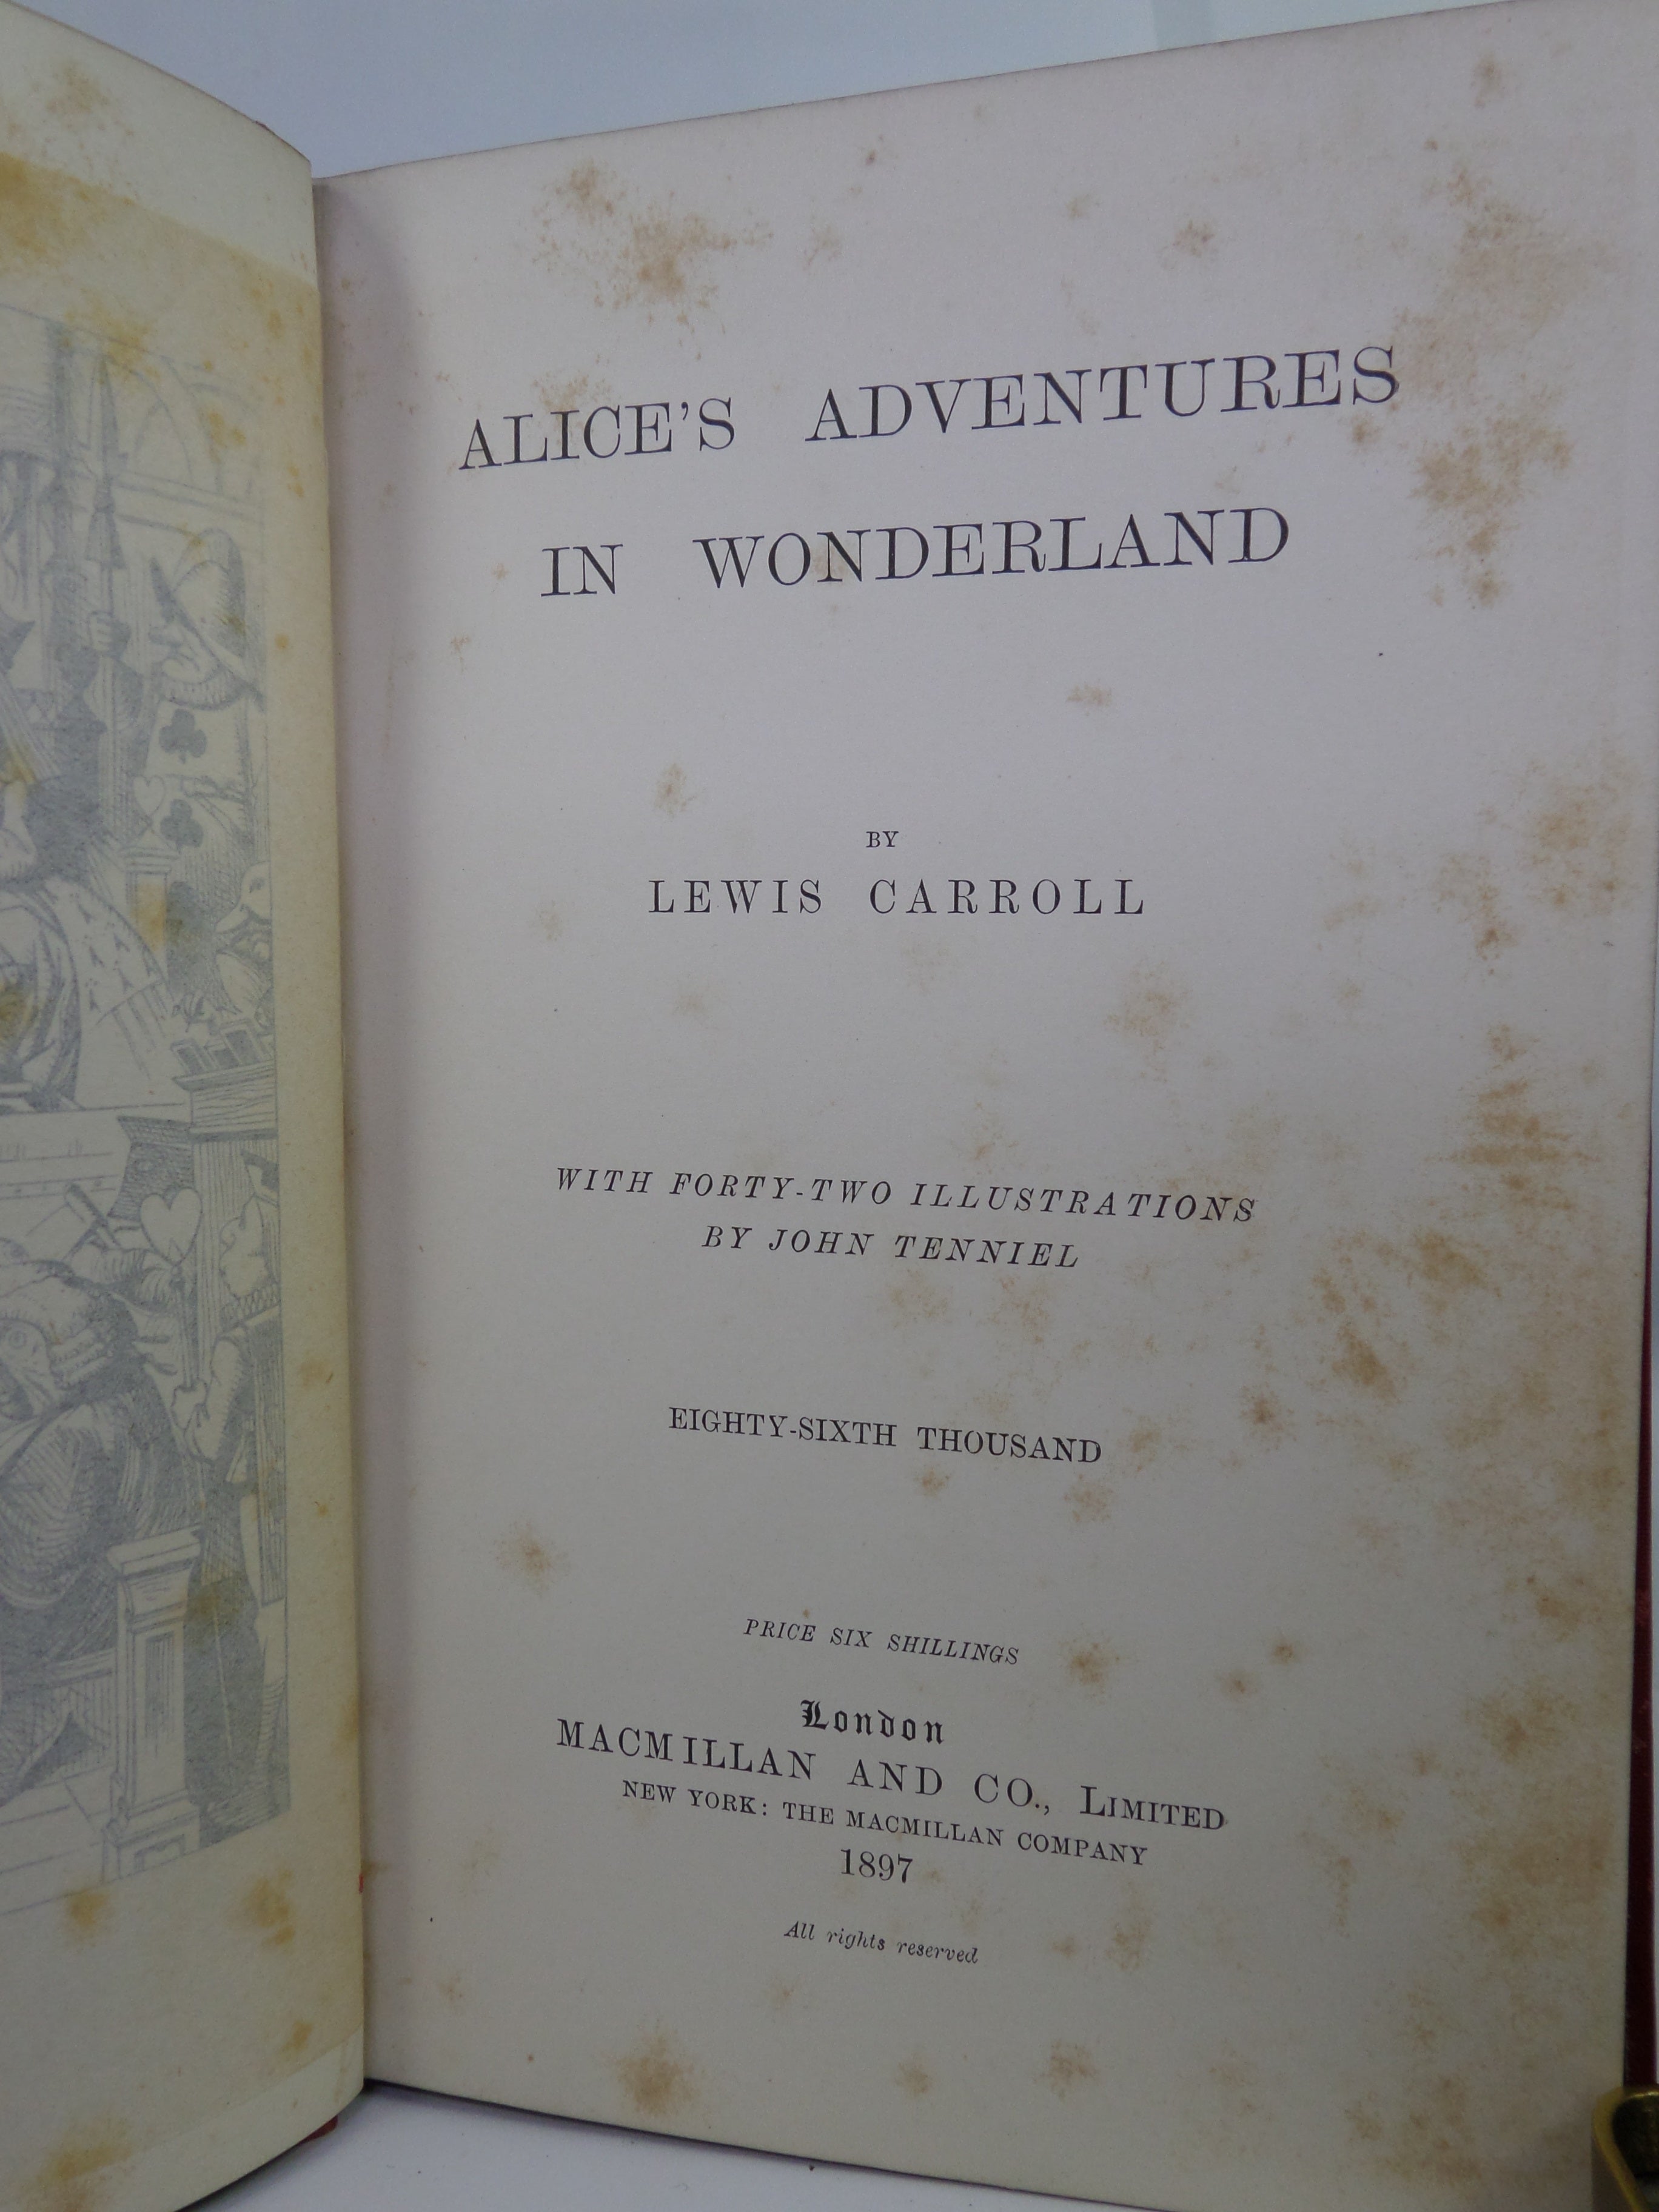 ALICE'S ADVENTURES IN WONDERLAND & THROUGH THE LOOKING-GLASS BY LEWIS CARROLL 1897 SCARCE UNIFORM SET